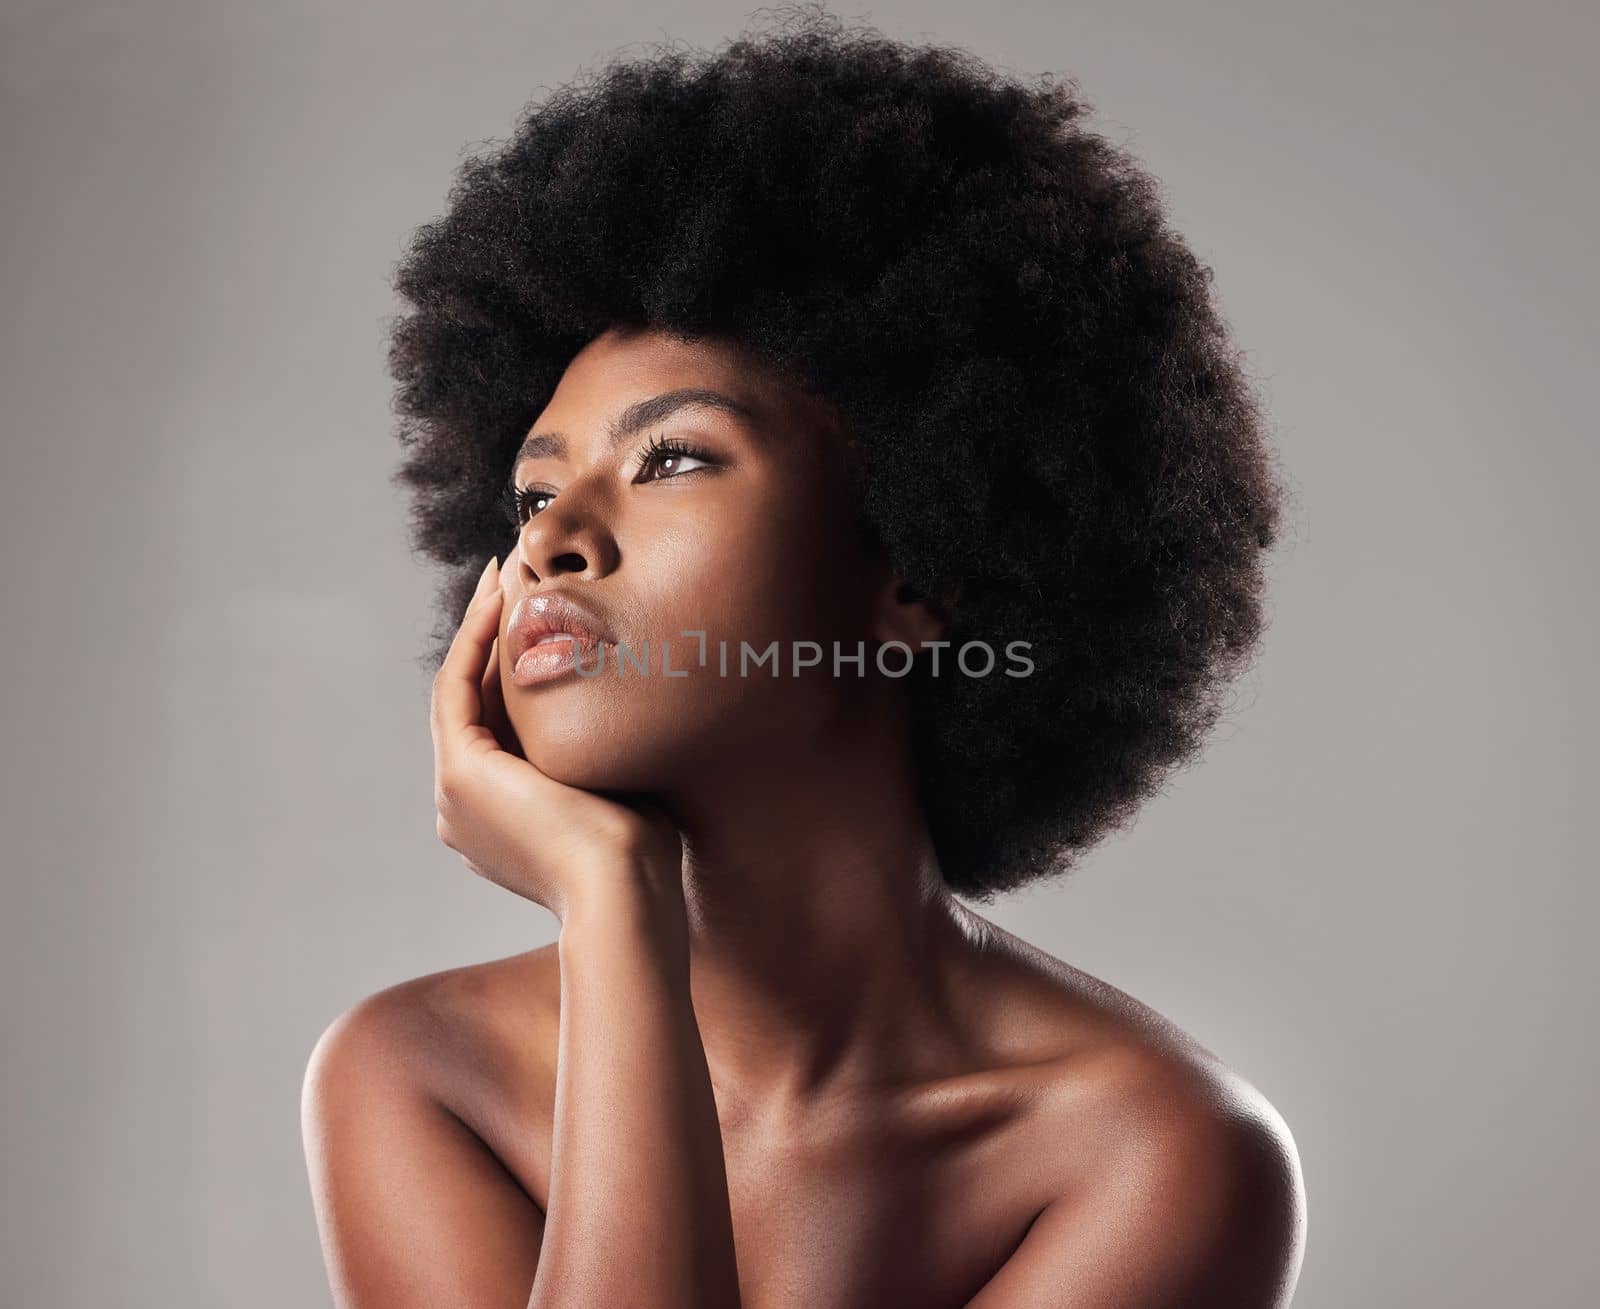 Embrace your skin at every stage. Studio shot of a young female posing against a grey background